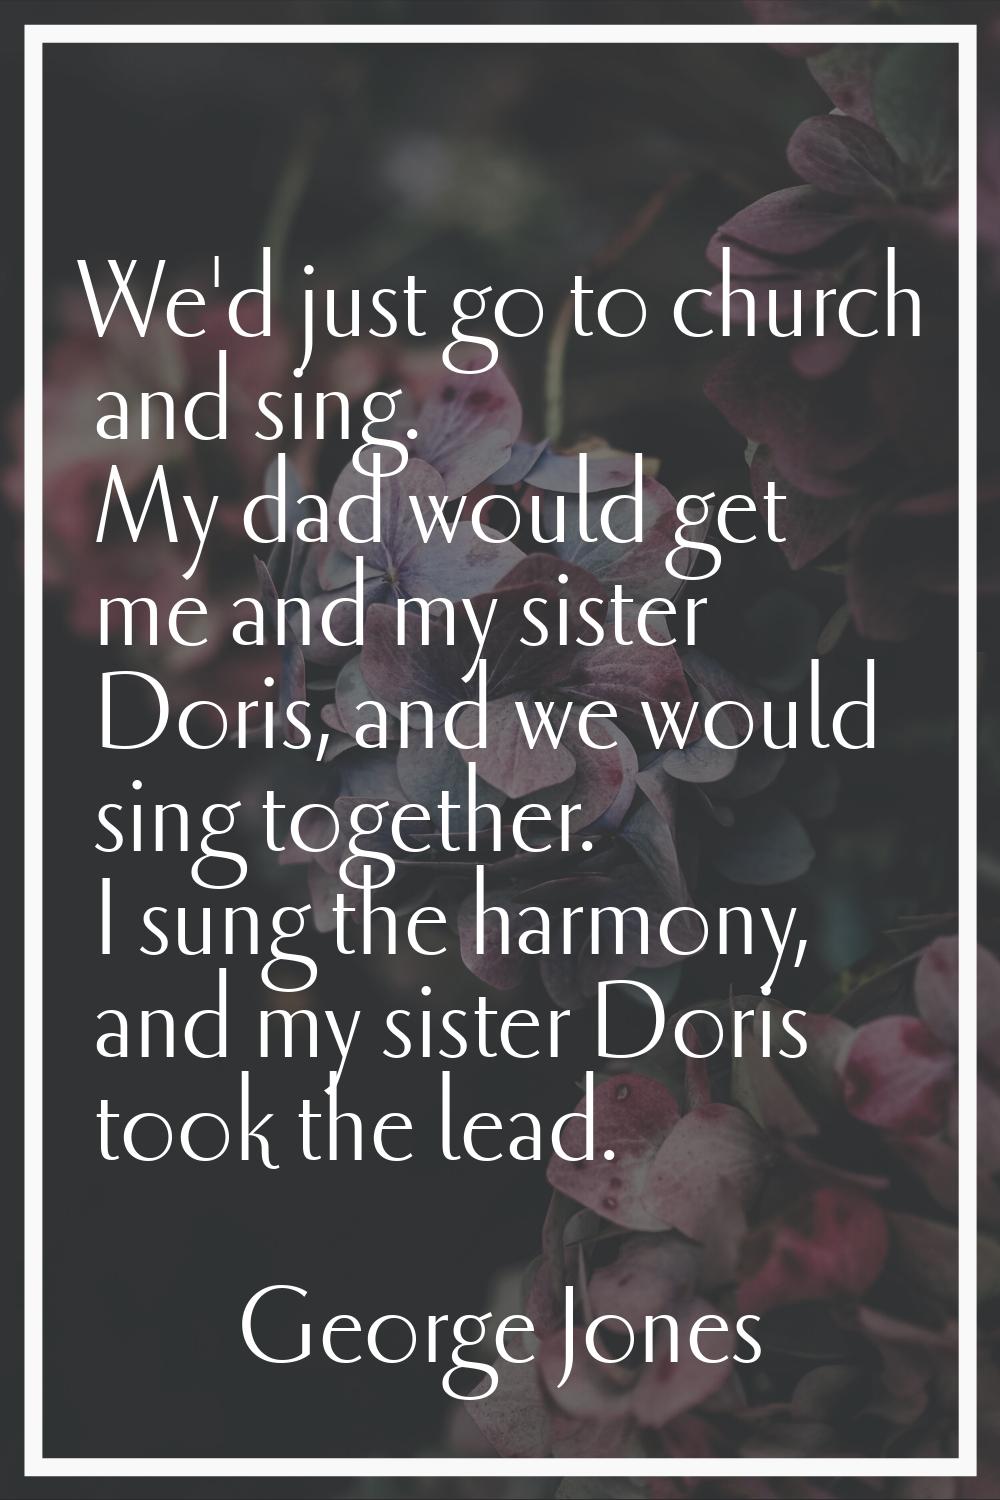 We'd just go to church and sing. My dad would get me and my sister Doris, and we would sing togethe